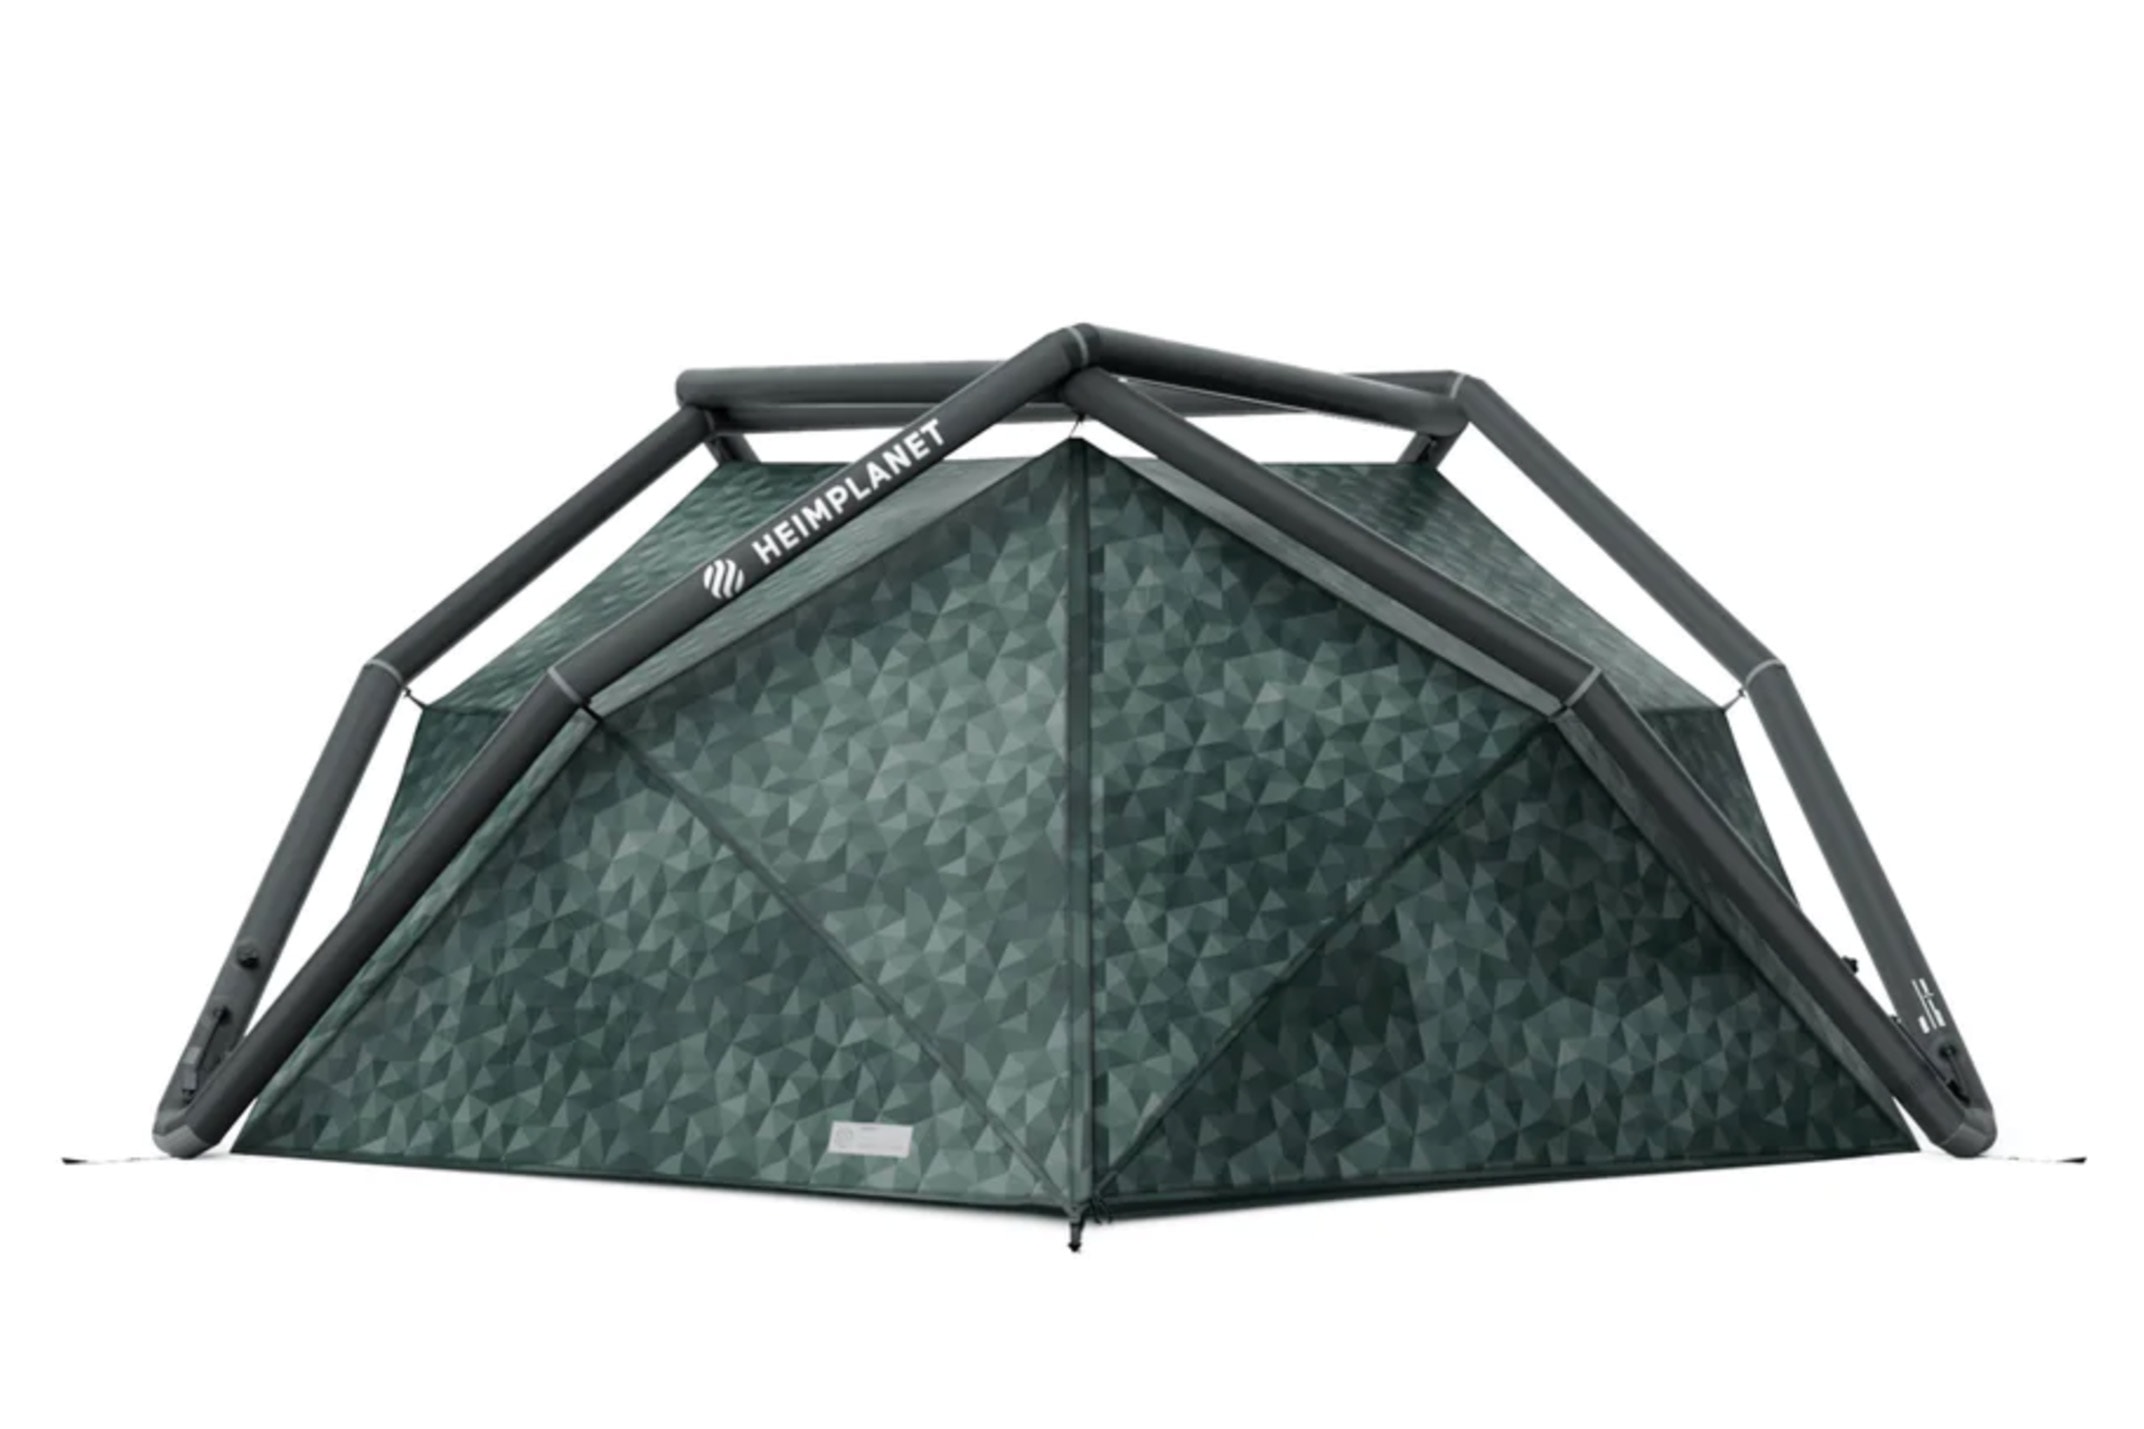 heimplanet KIRRA CAIRO CAMO 2 person inflatable tent